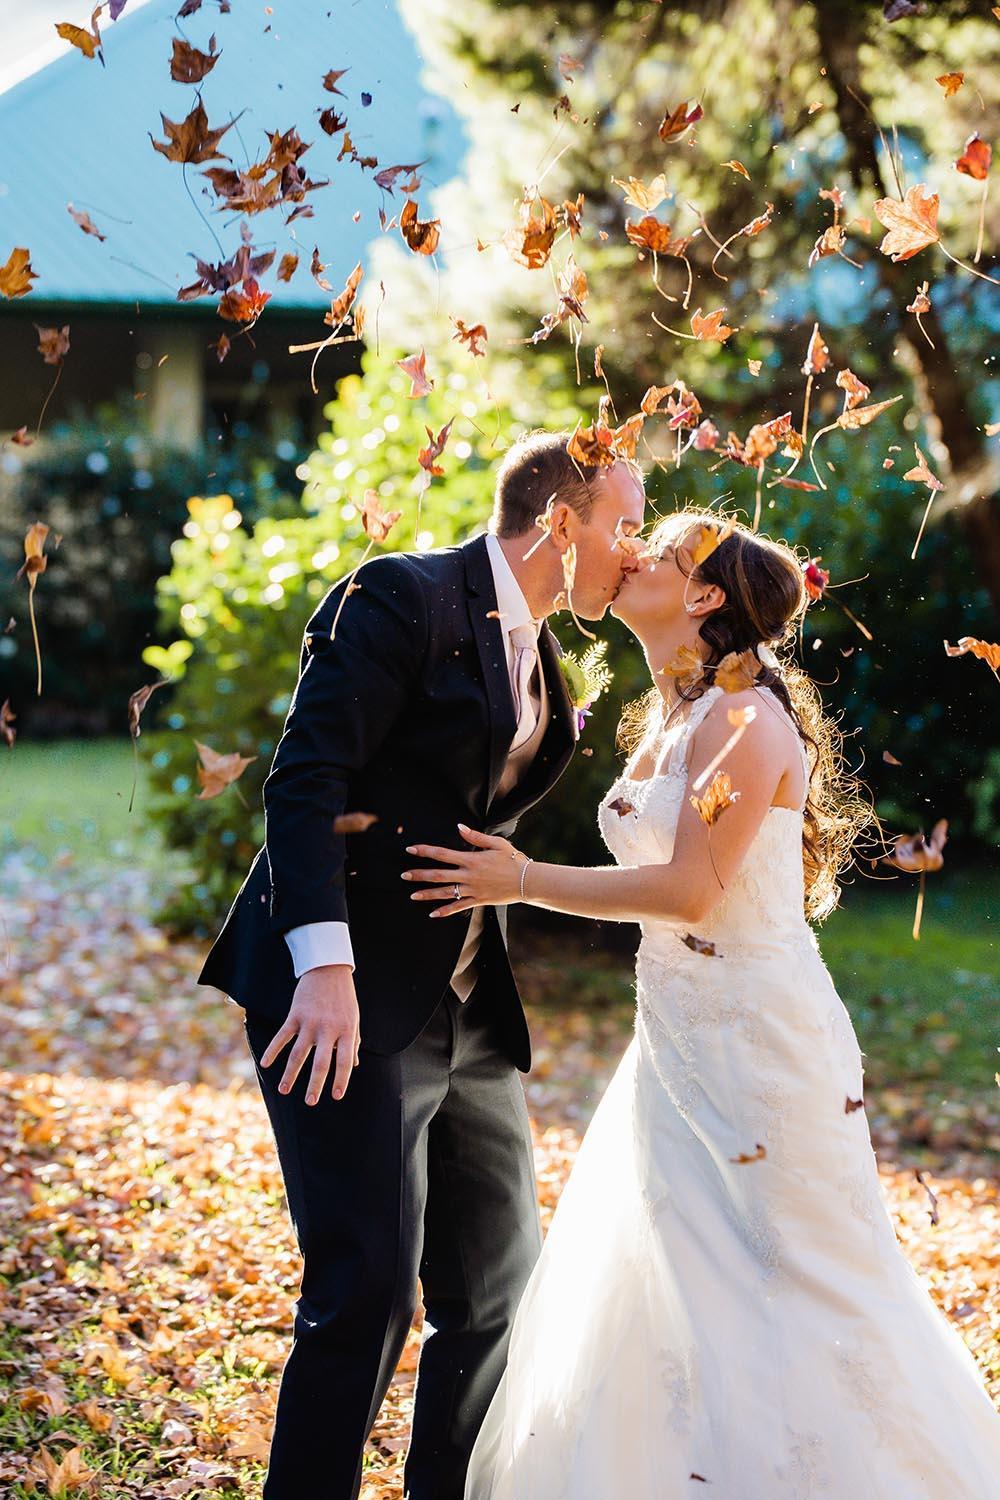 Wedding Photography Couple Throwing Leaves